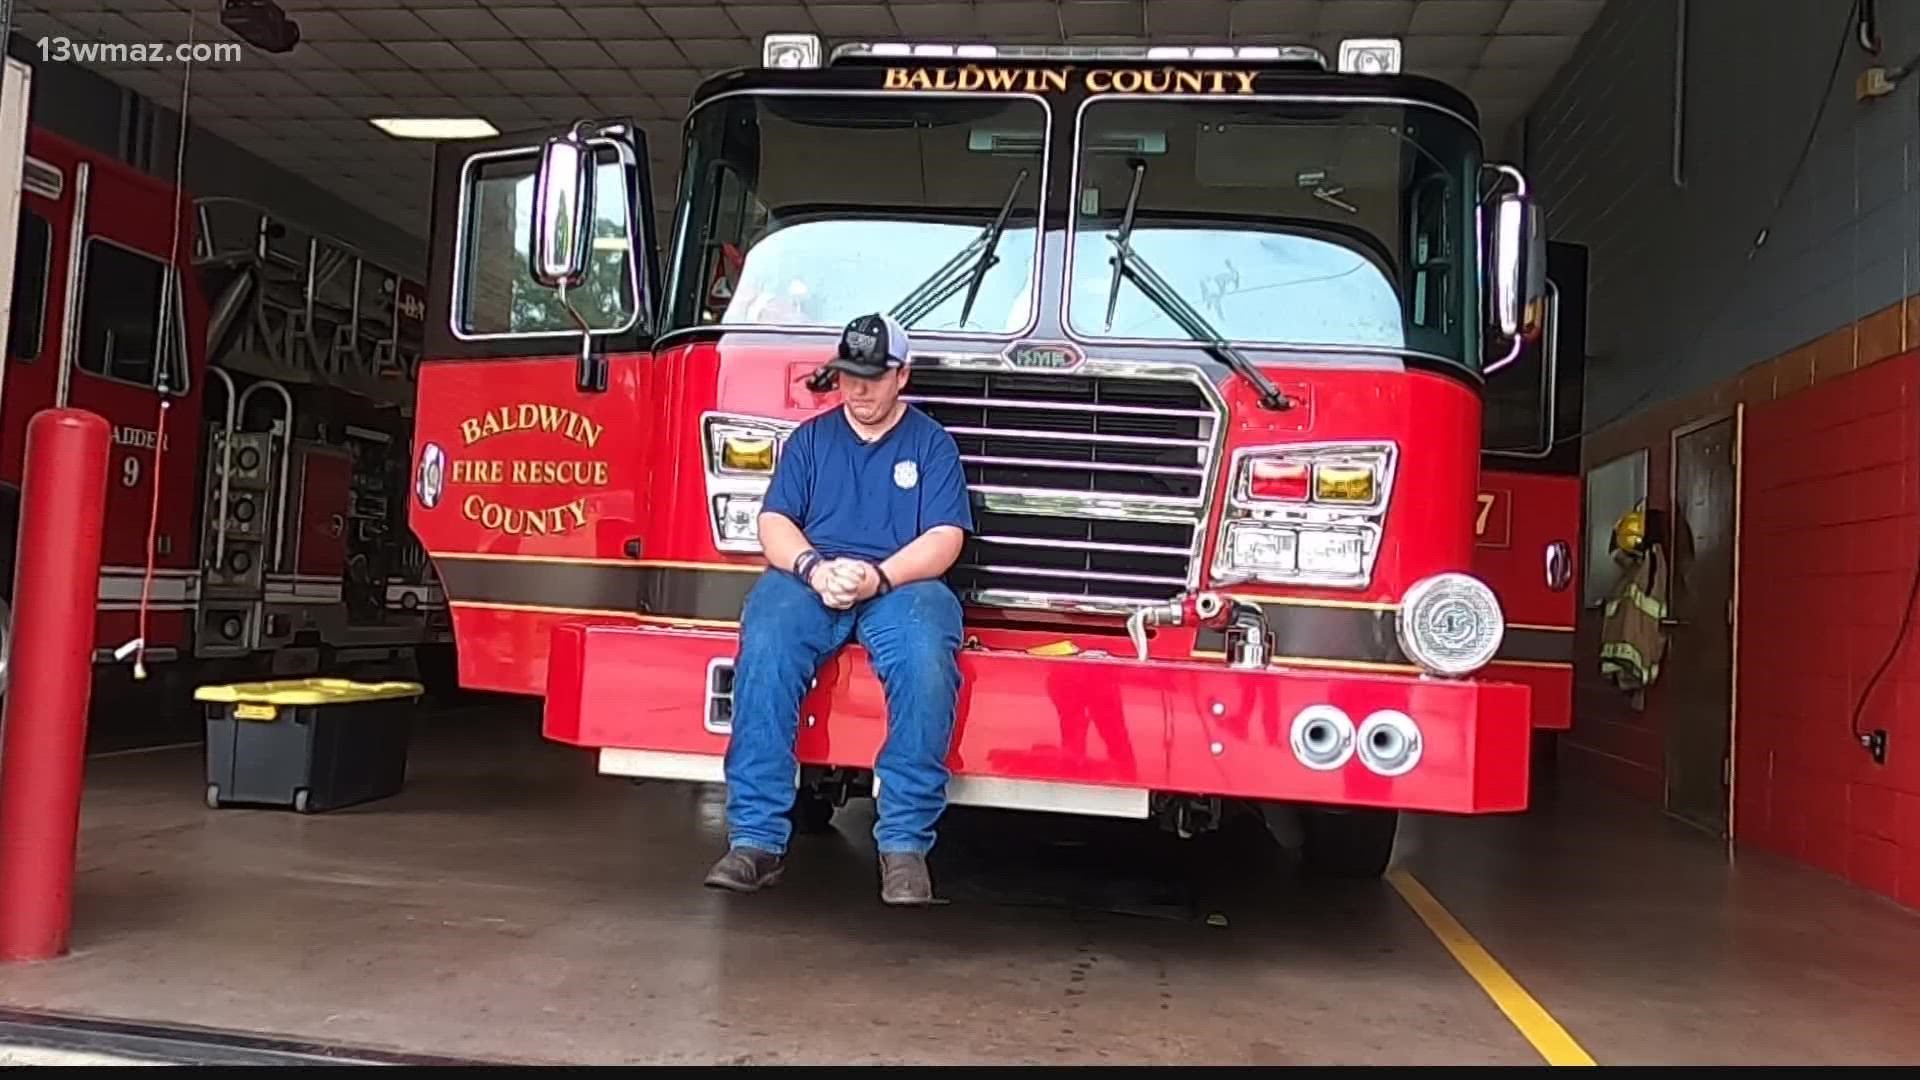 Garry Mitchem has always dreamed of becoming a firefighter for Baldwin county.